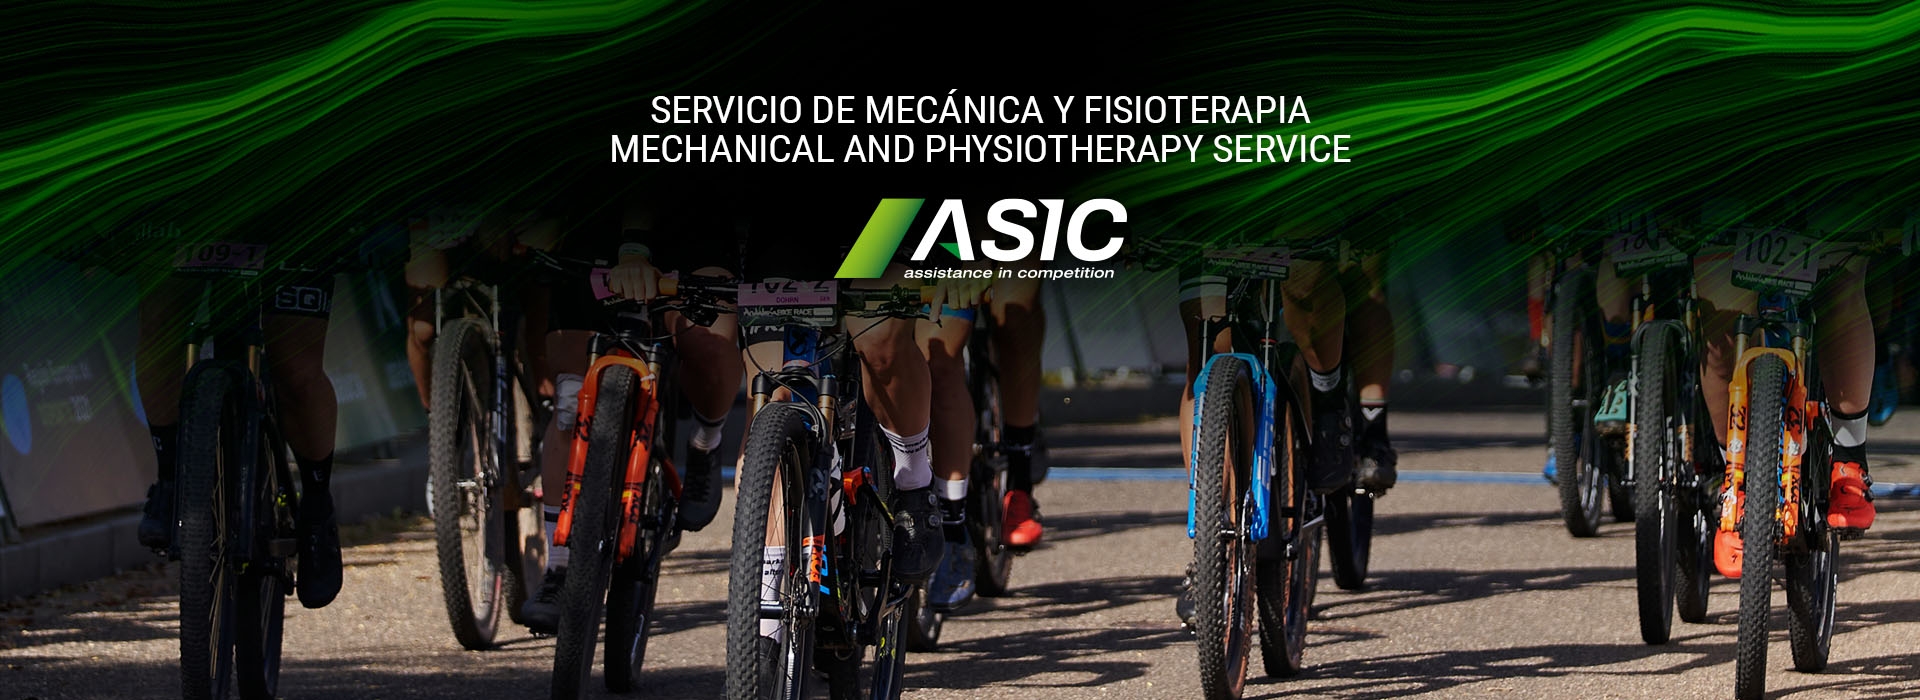 ASIC LIMITS WILL OFFER THE OFFICIAL MECHANICS AND PHYSIOTHERAPY SERVICE